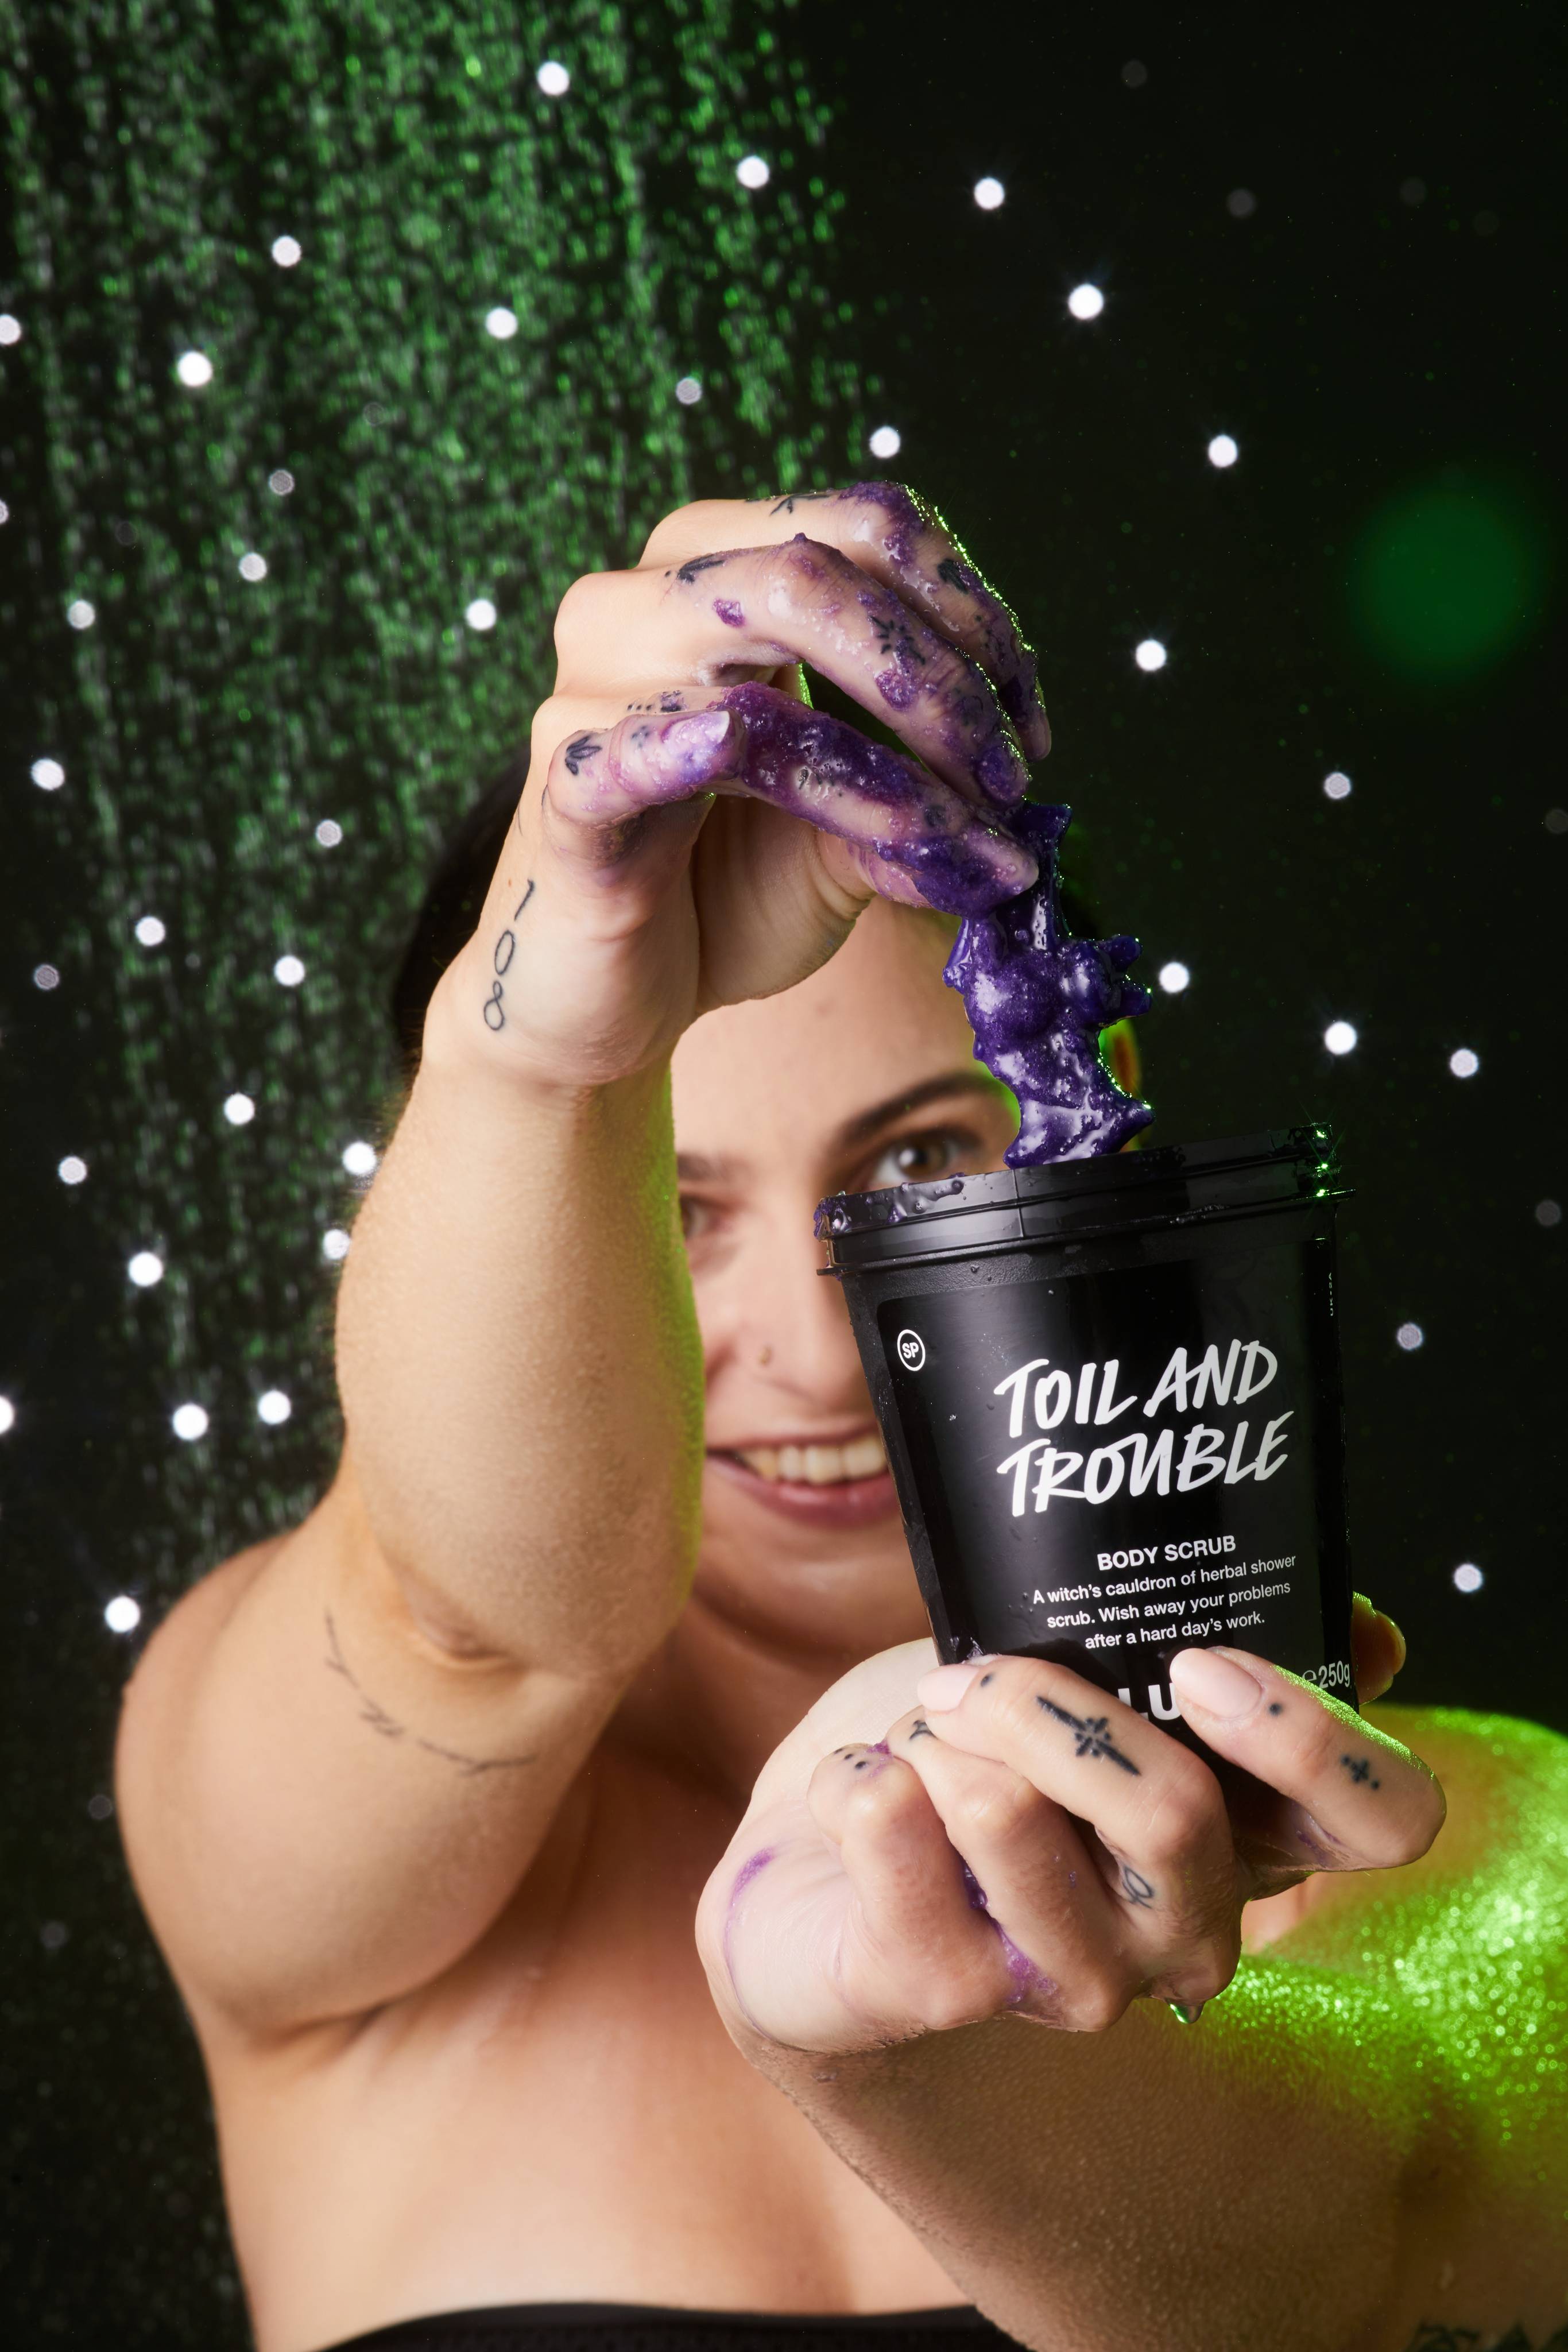 Model holds the product pot with one hand as they dip their other hand in, covering it in body scrub, pulling out the jelly bat.